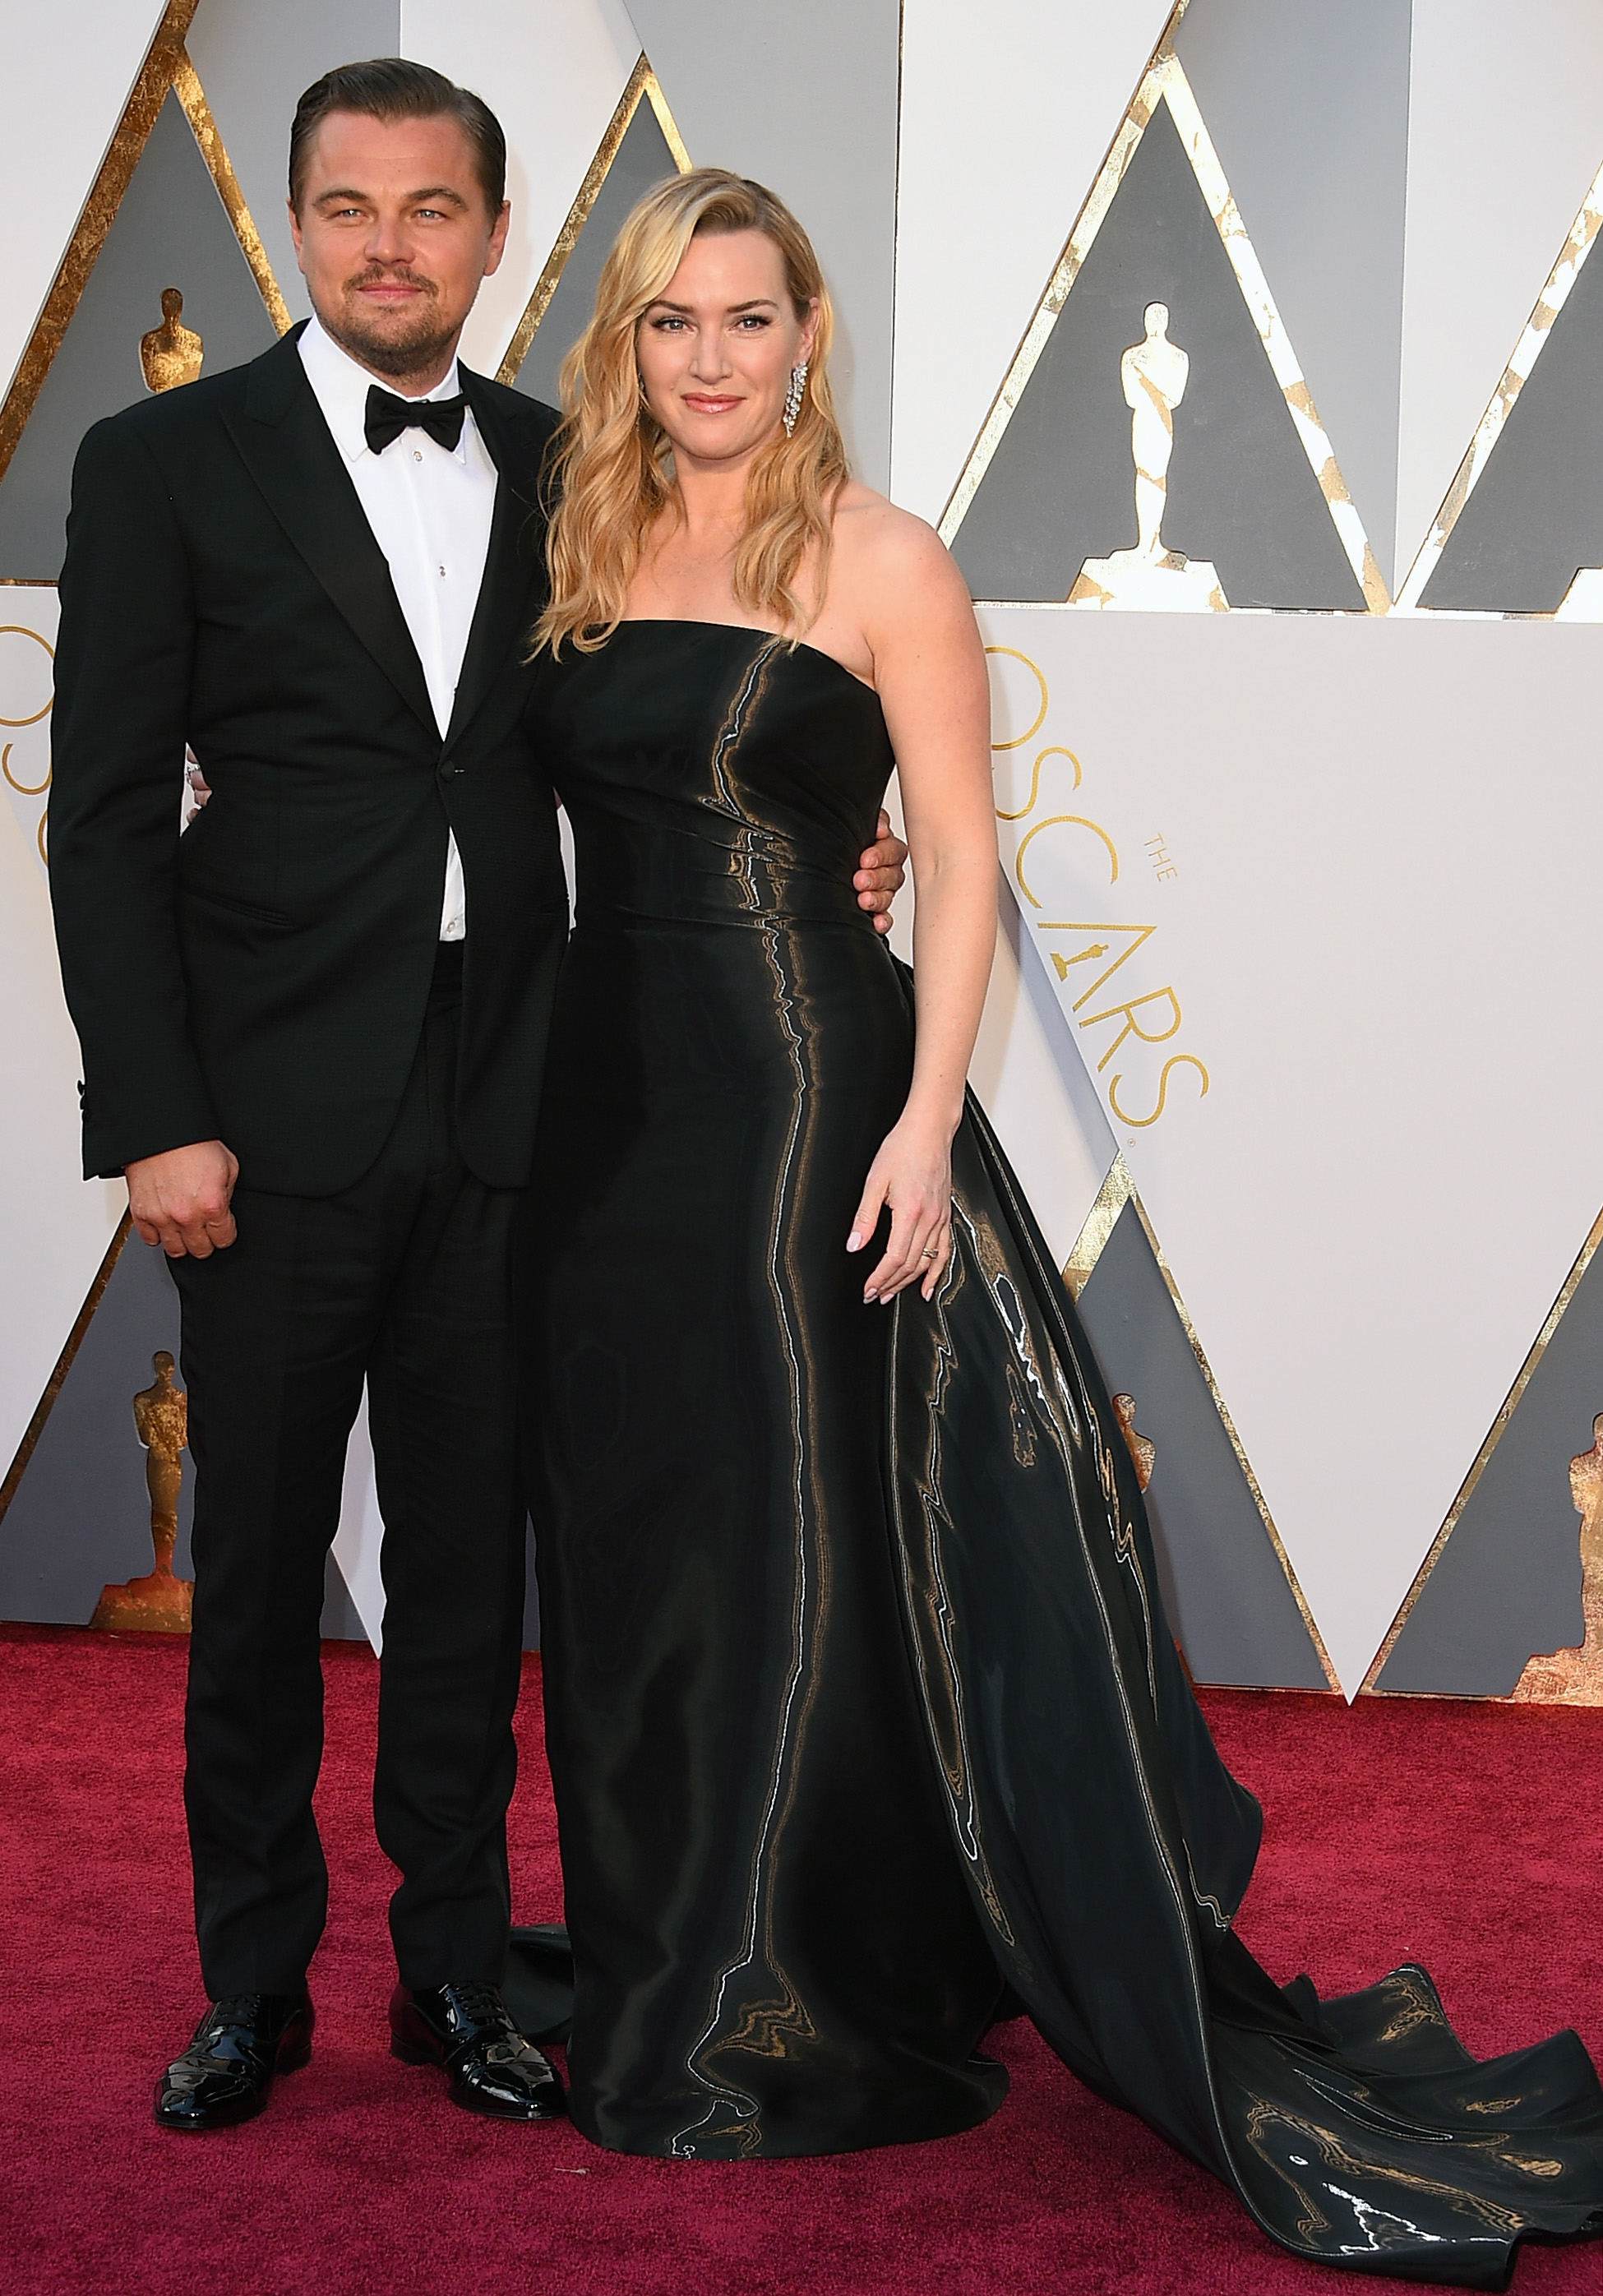 Leonardo DiCaprio and Kate Winslet attend the 88th Annual Academy Awards on Feb. 28, 2016 in Hollywood, Calif.